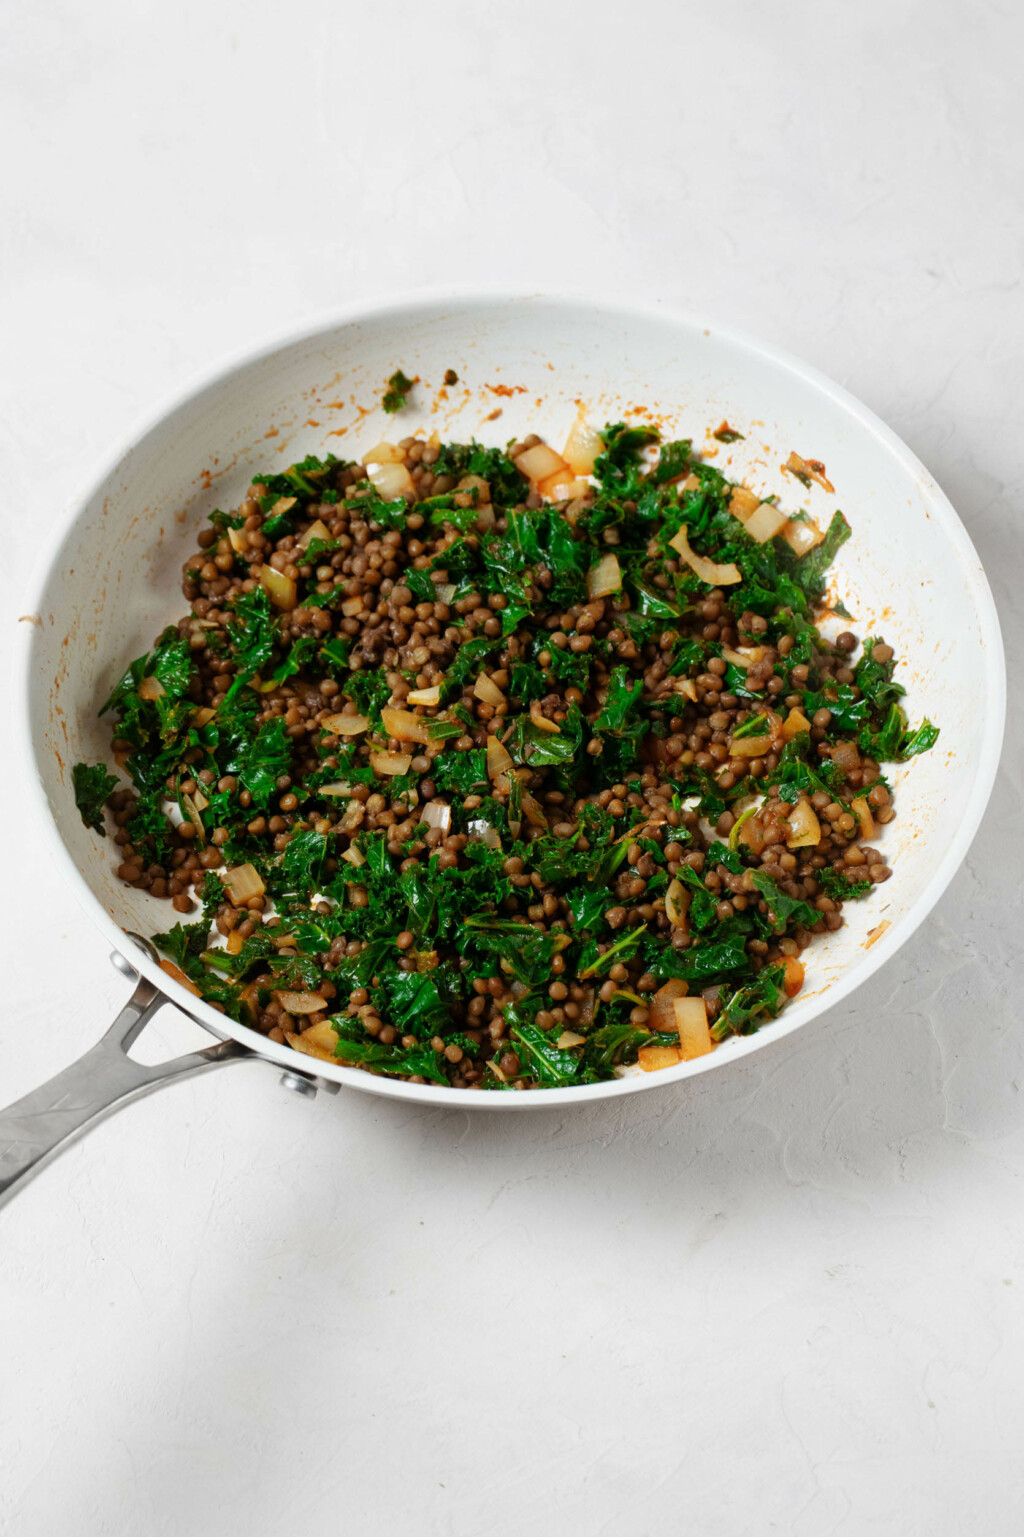 A white, non-stick sauté pan is being used to cook a mixture of brown lentils and green kale.